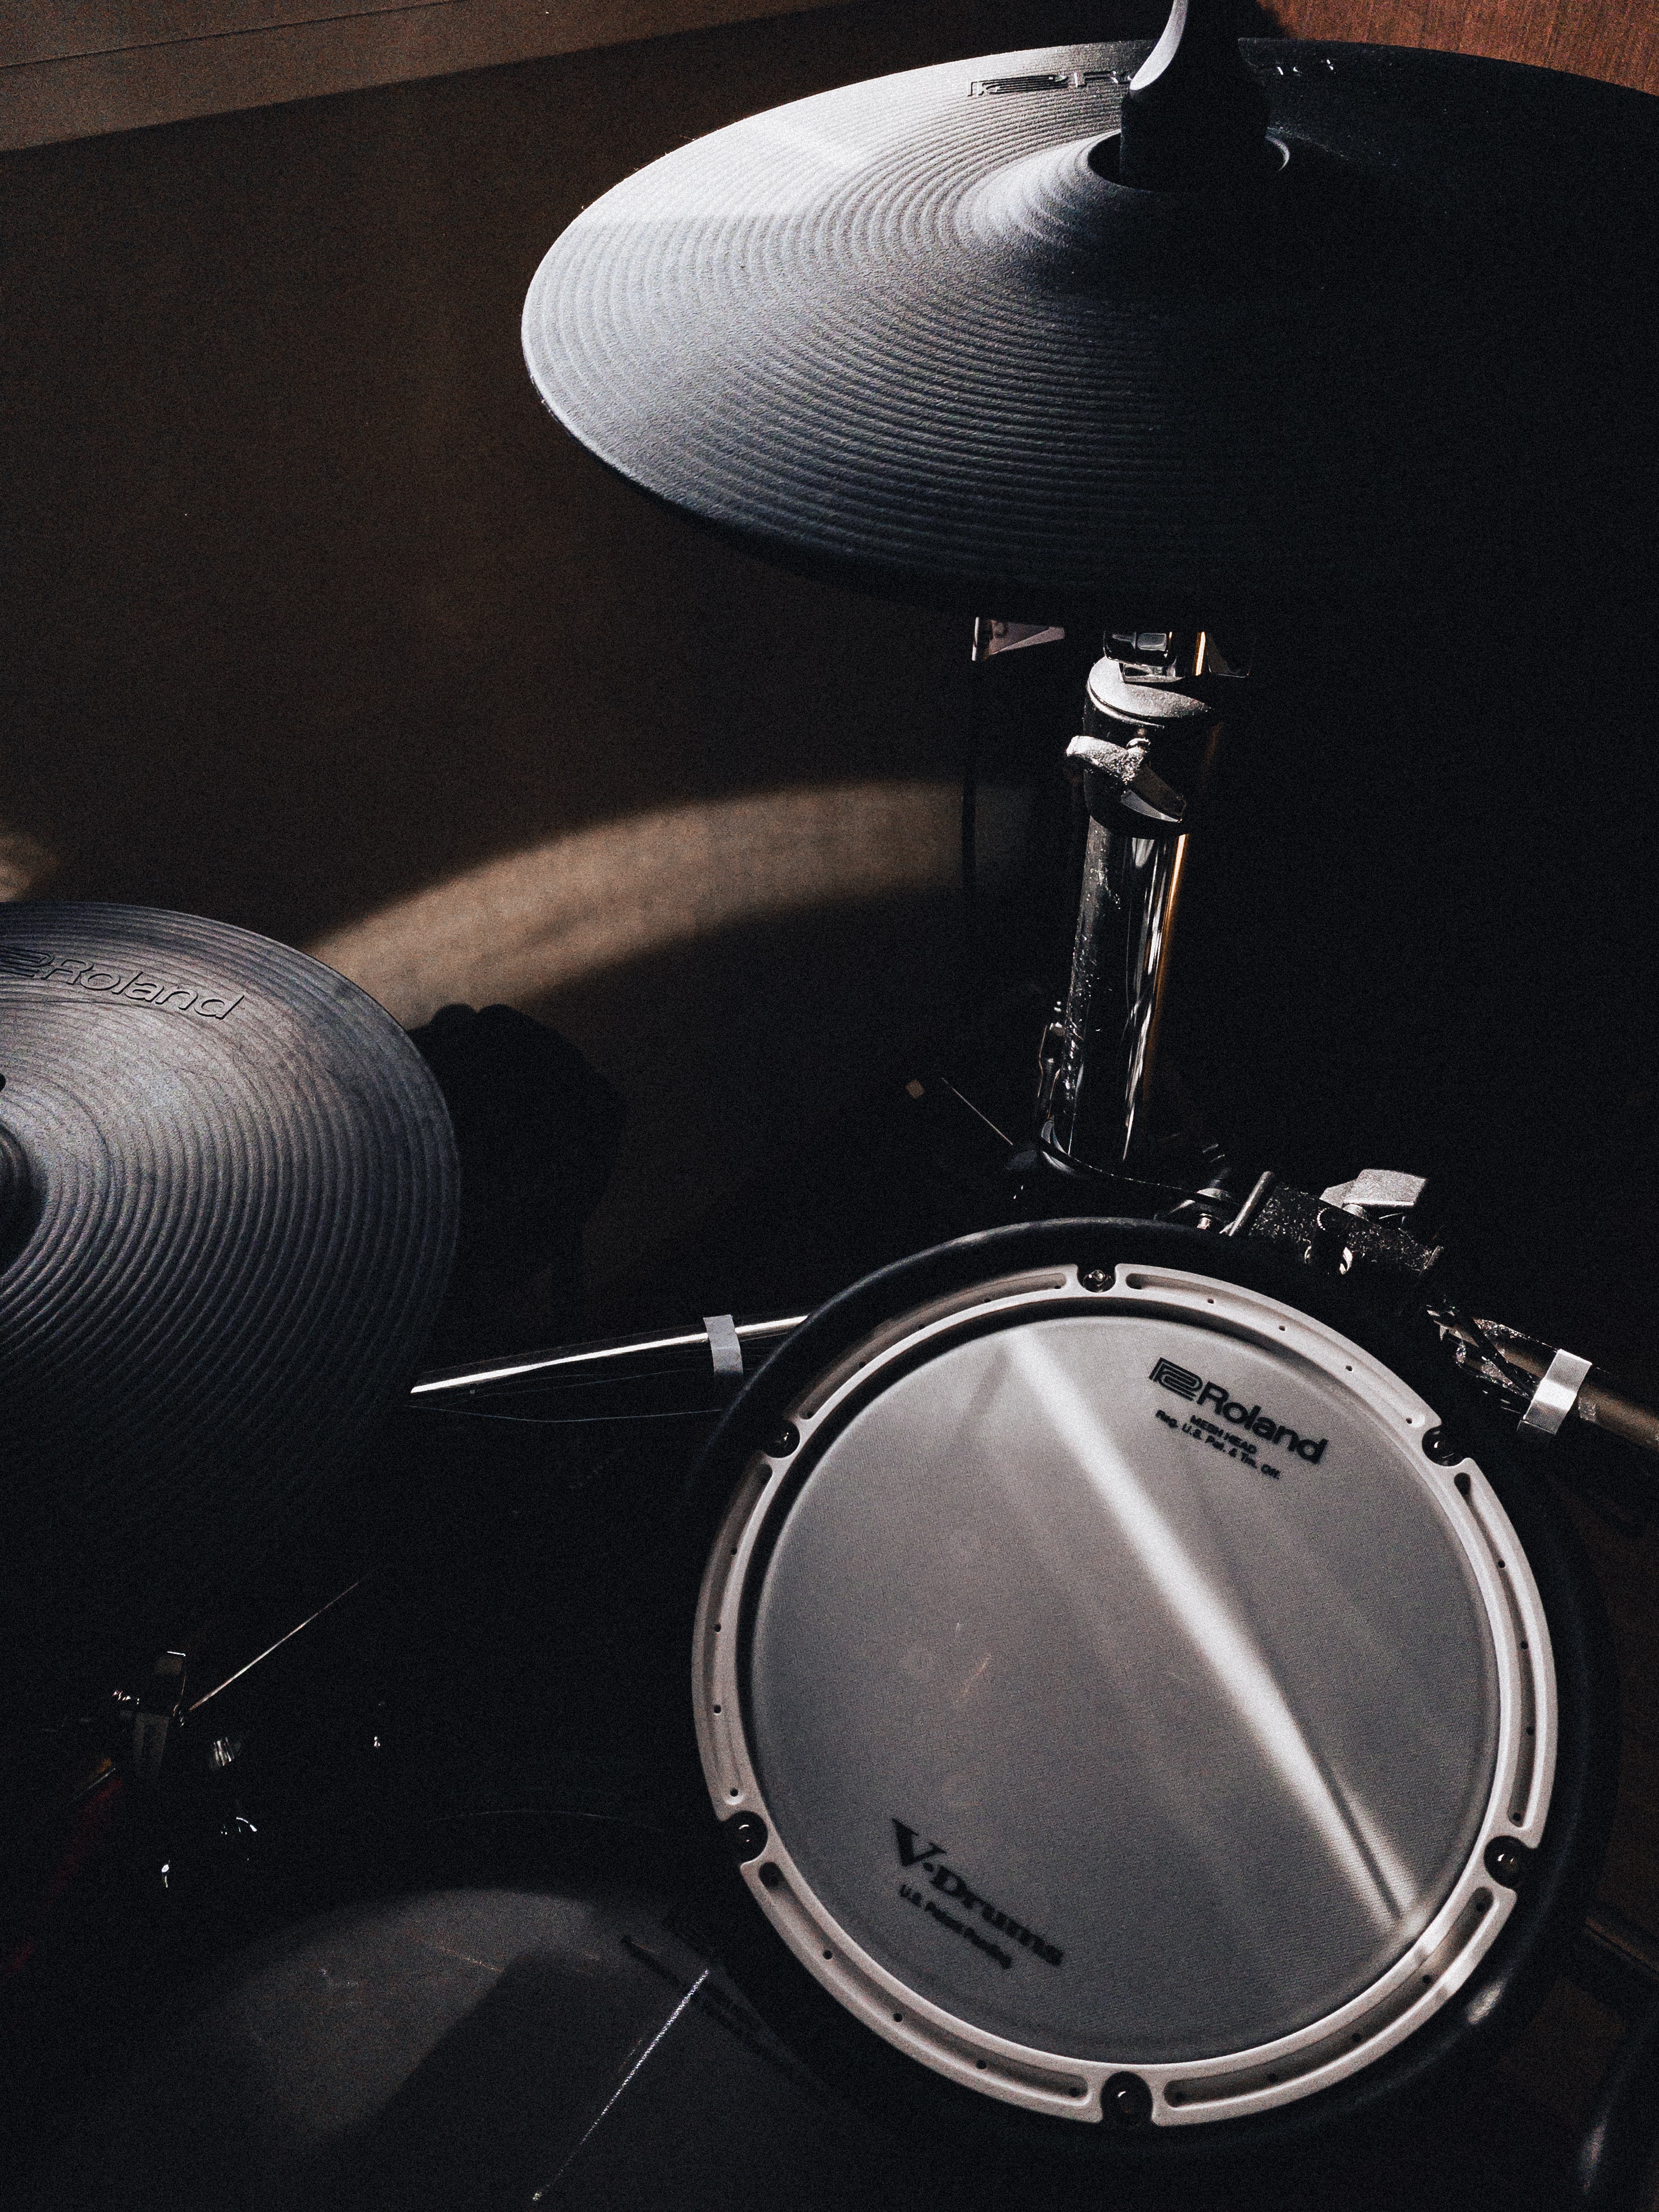 Download Drums wallpaper for mobile